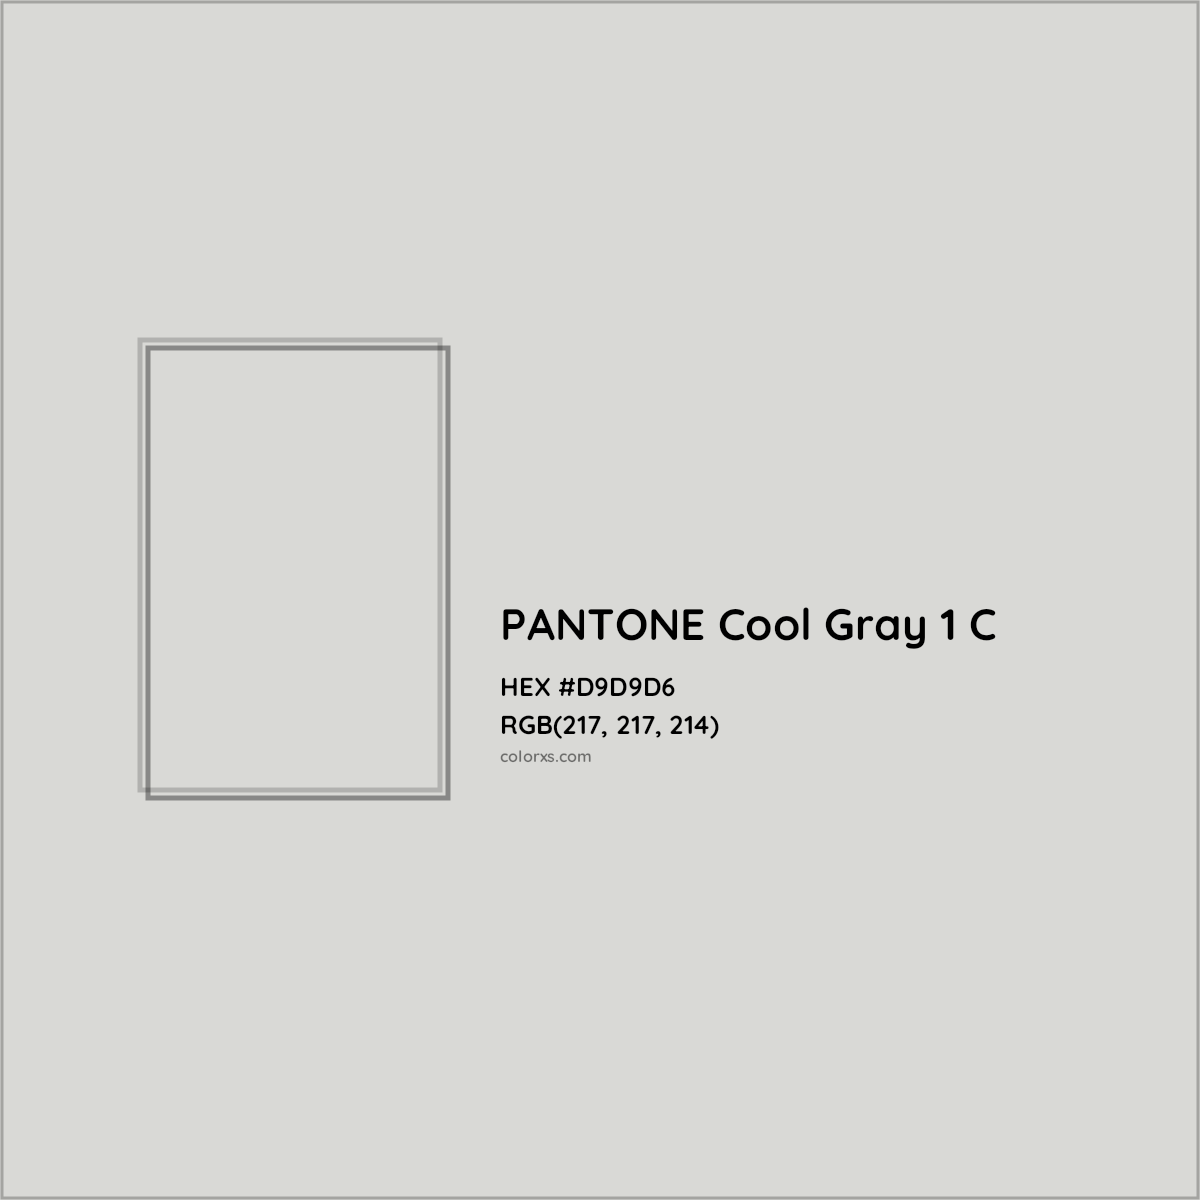 About Pantone Cool Gray 1 C Color Color Codes Similar Colors And